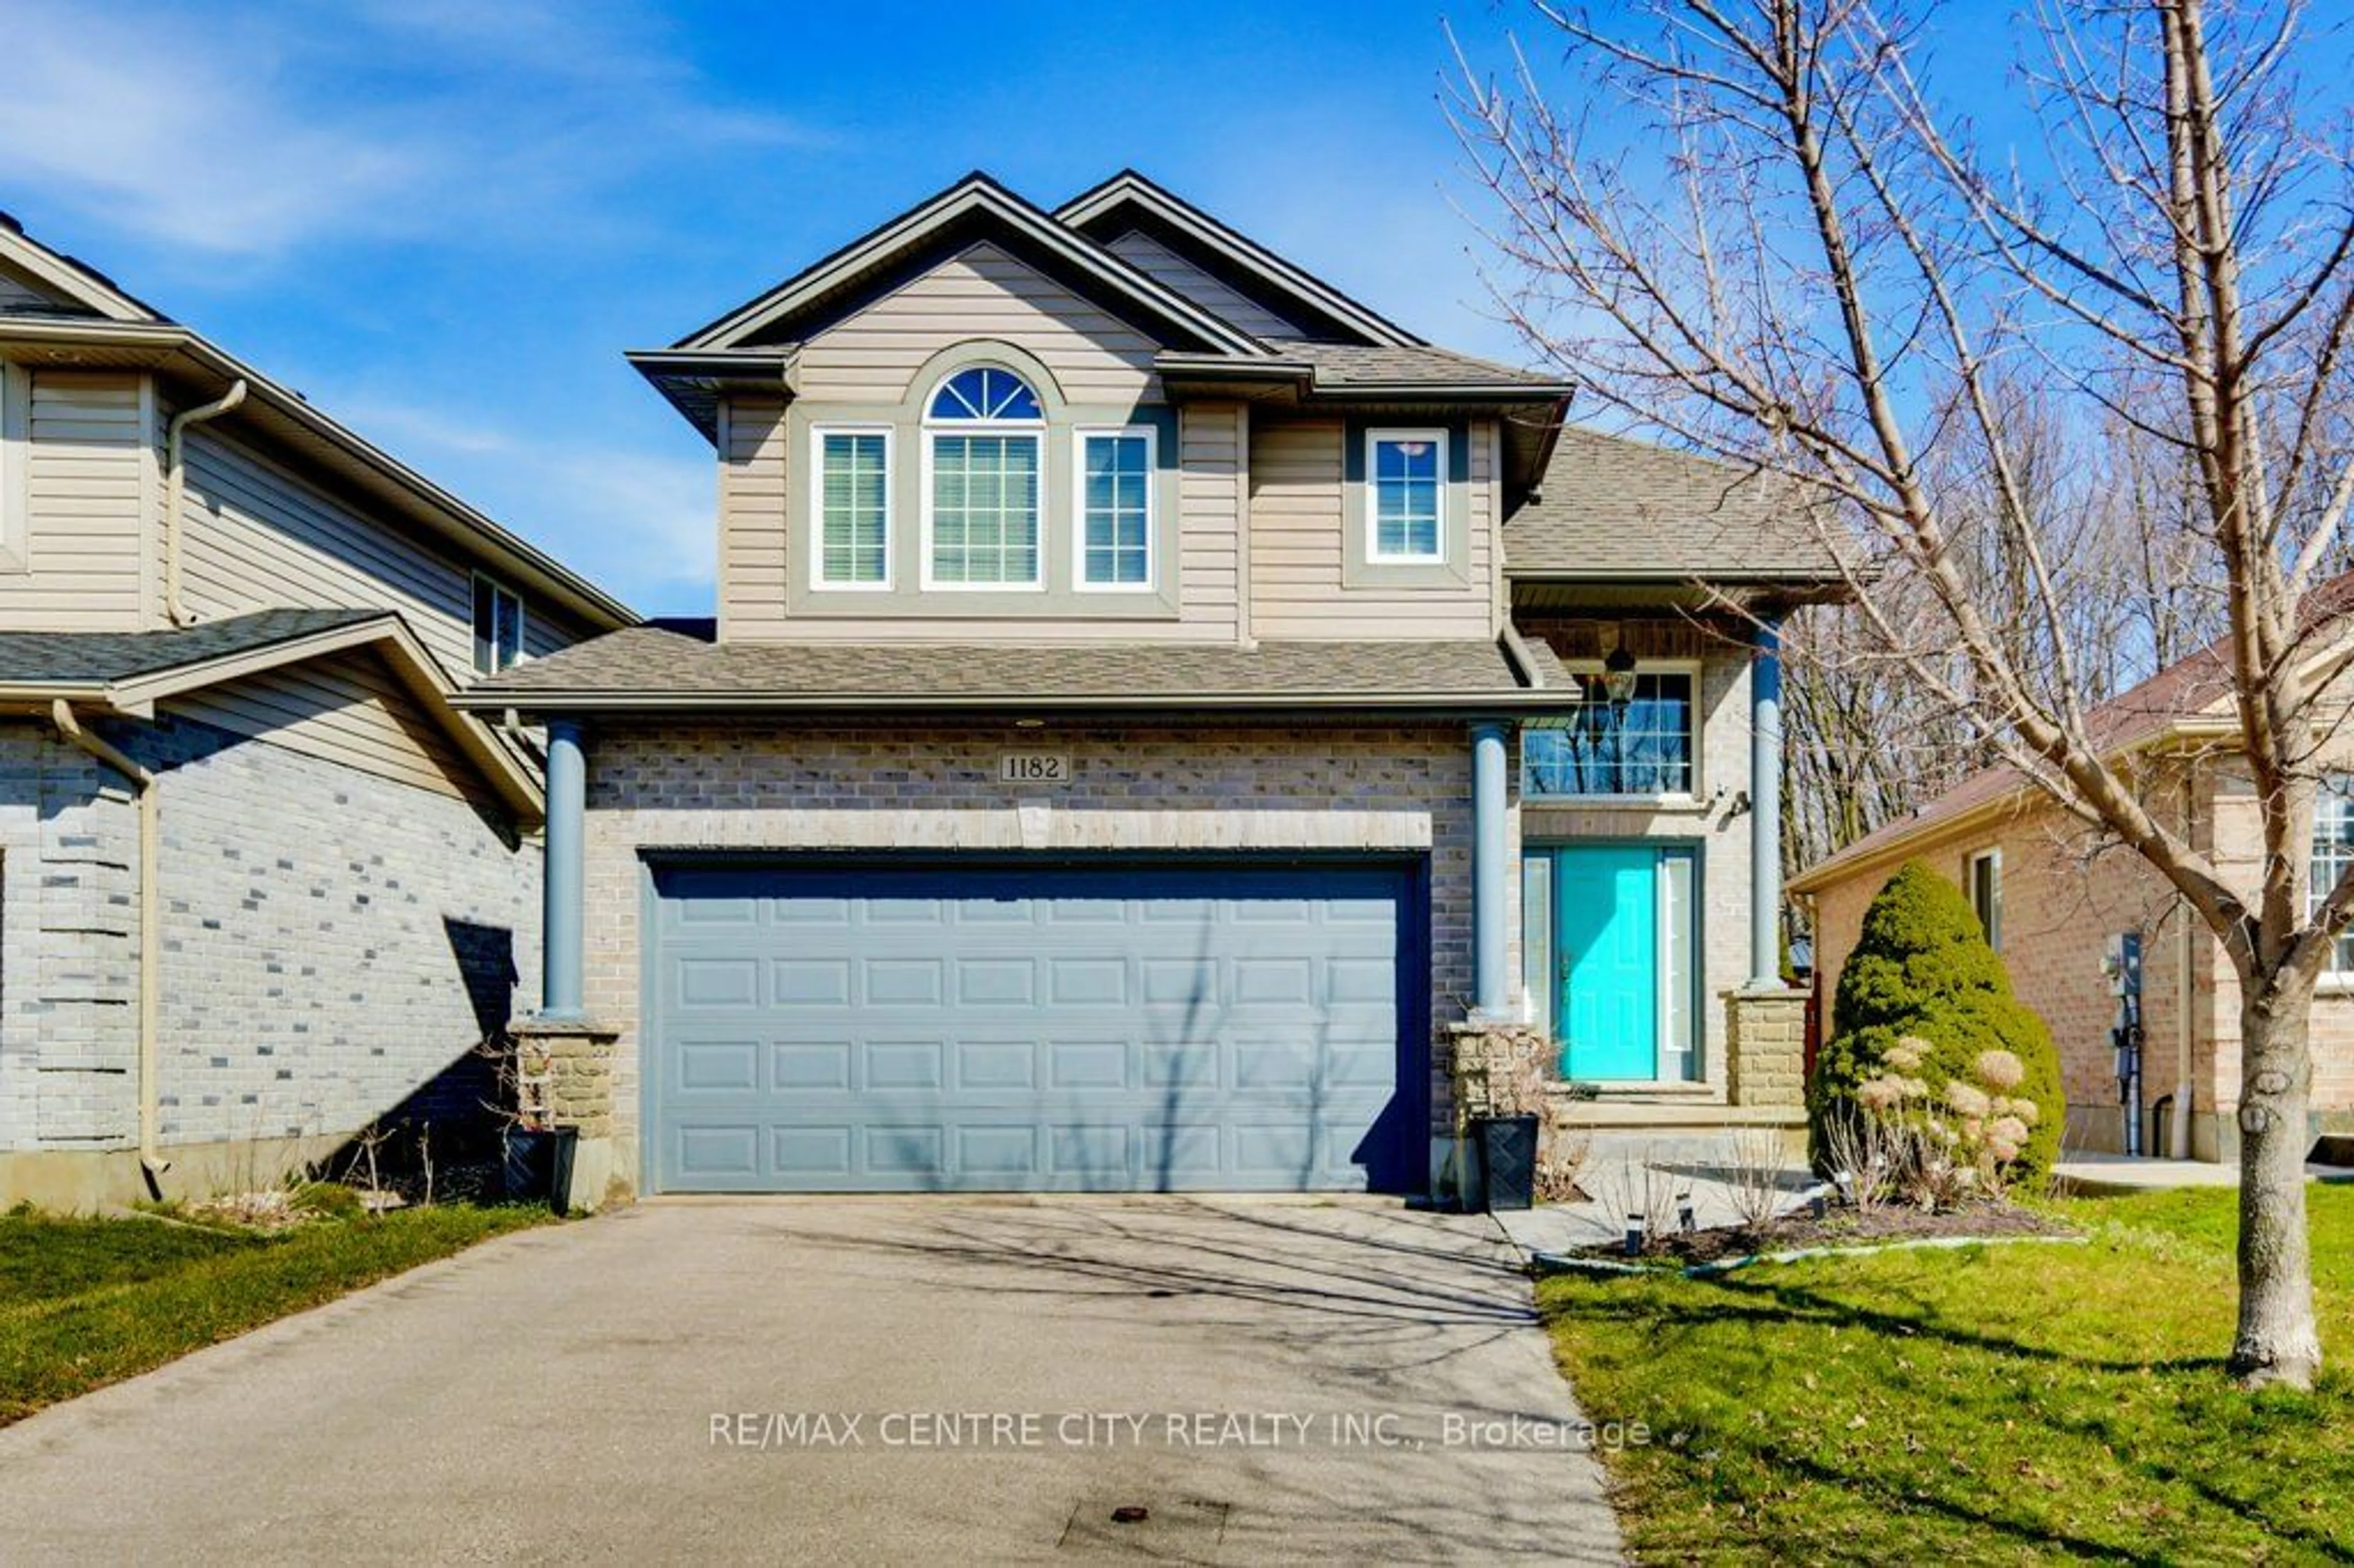 Frontside or backside of a home for 1182 Smither Rd, London Ontario N6G 5R8